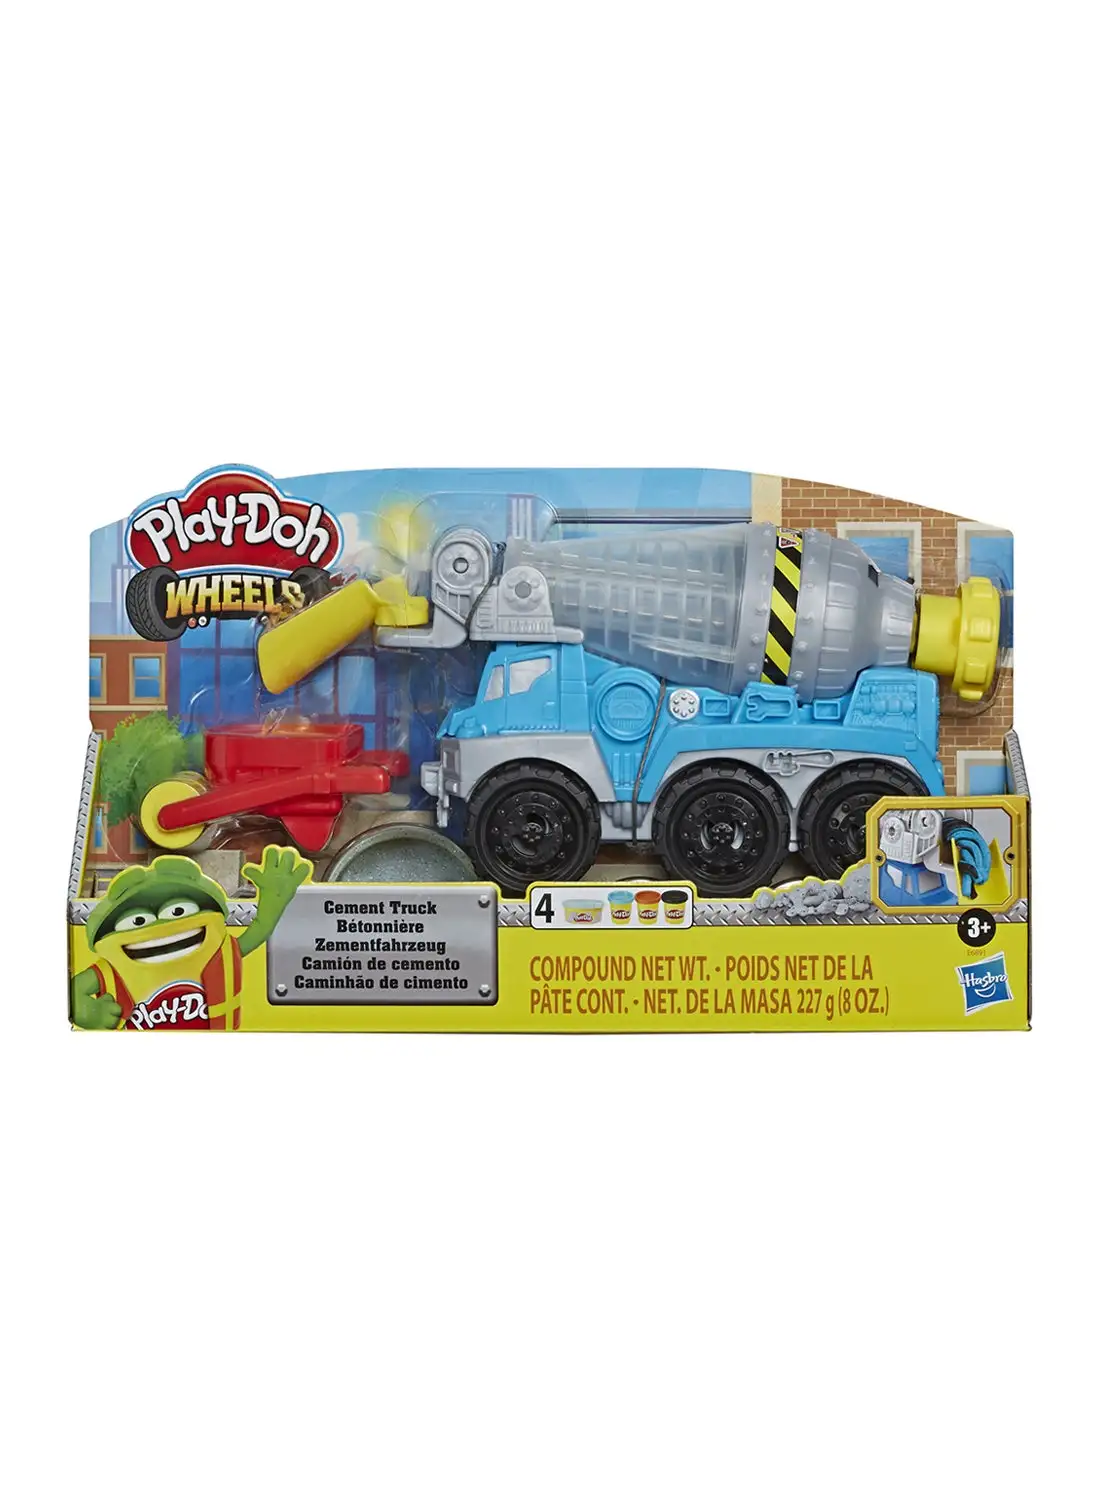 Play-Doh Play-Doh Wheels Cement Truck Toy For Kids Ages 3 And Up With Non-Toxic Play-Doh Cement-Colored Buildin Compound Plus 3 Colors ‎8x38x21cm